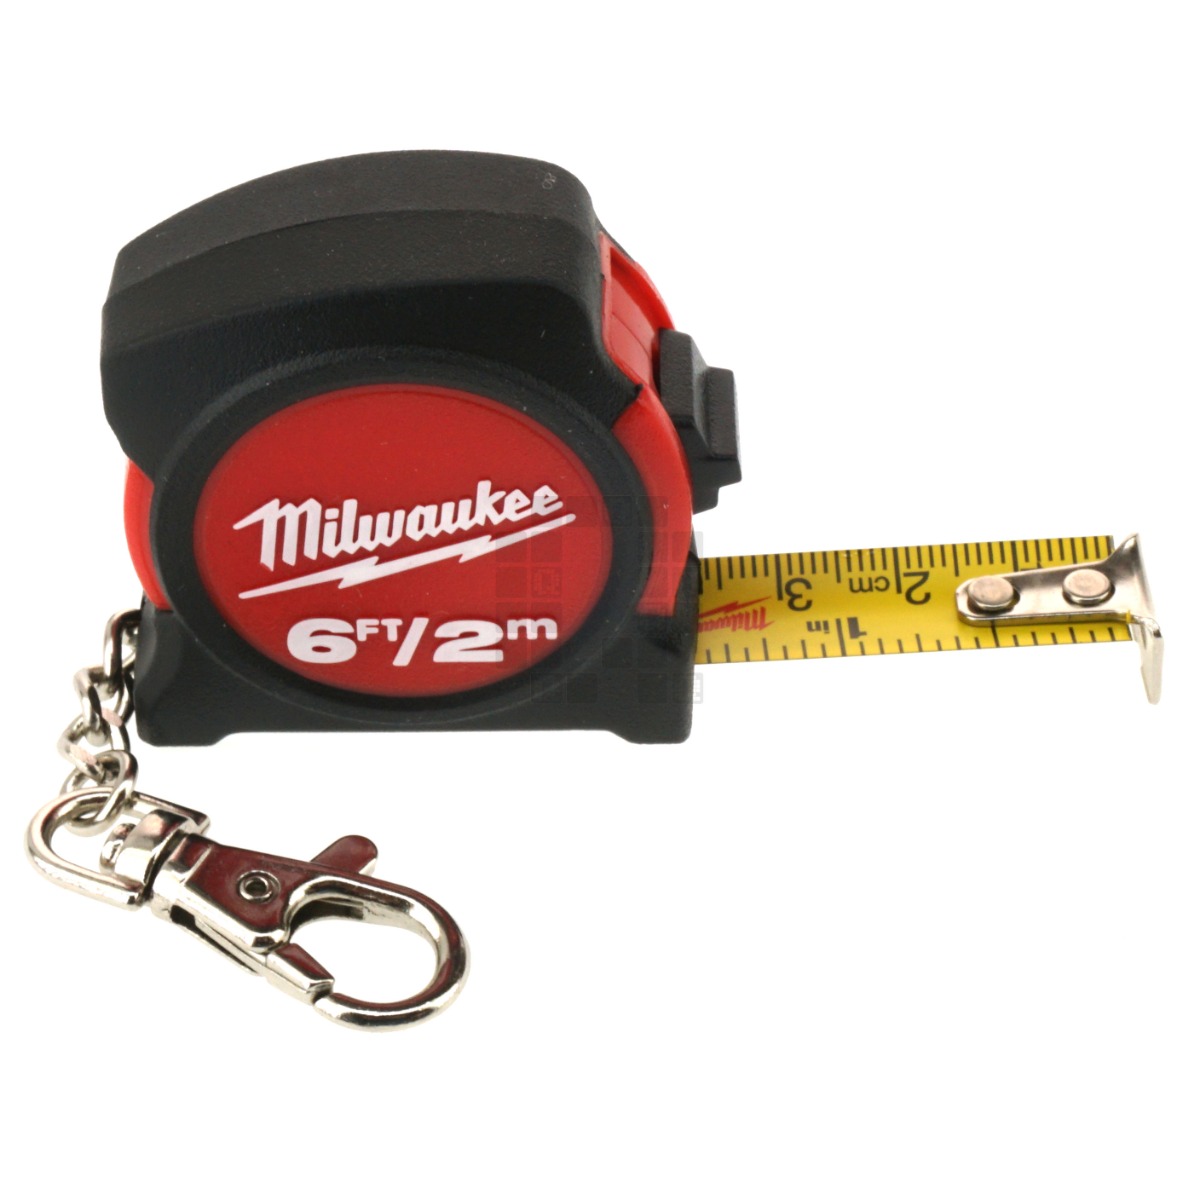 48 Wholesale Keychain Tape Measure - at 